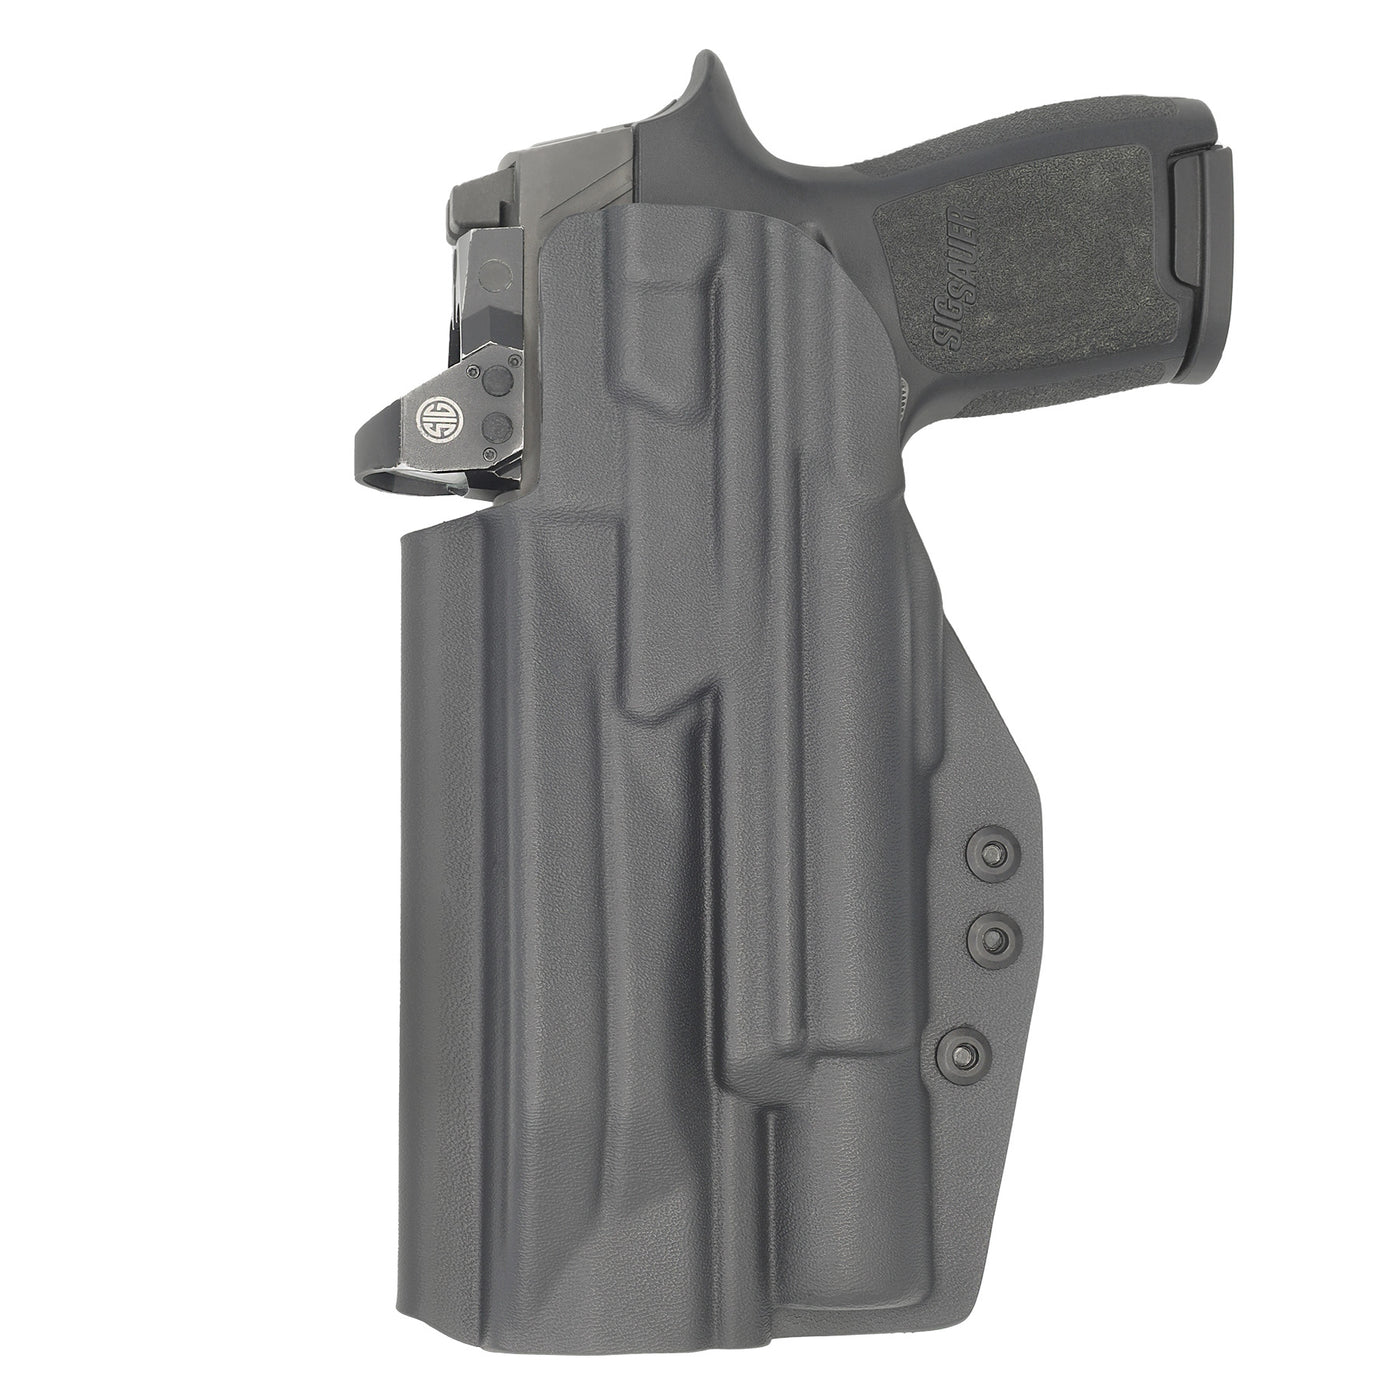 C&G Holsters quickship IWB Tactical FNX 45T Surefire X300 in holstered position back view